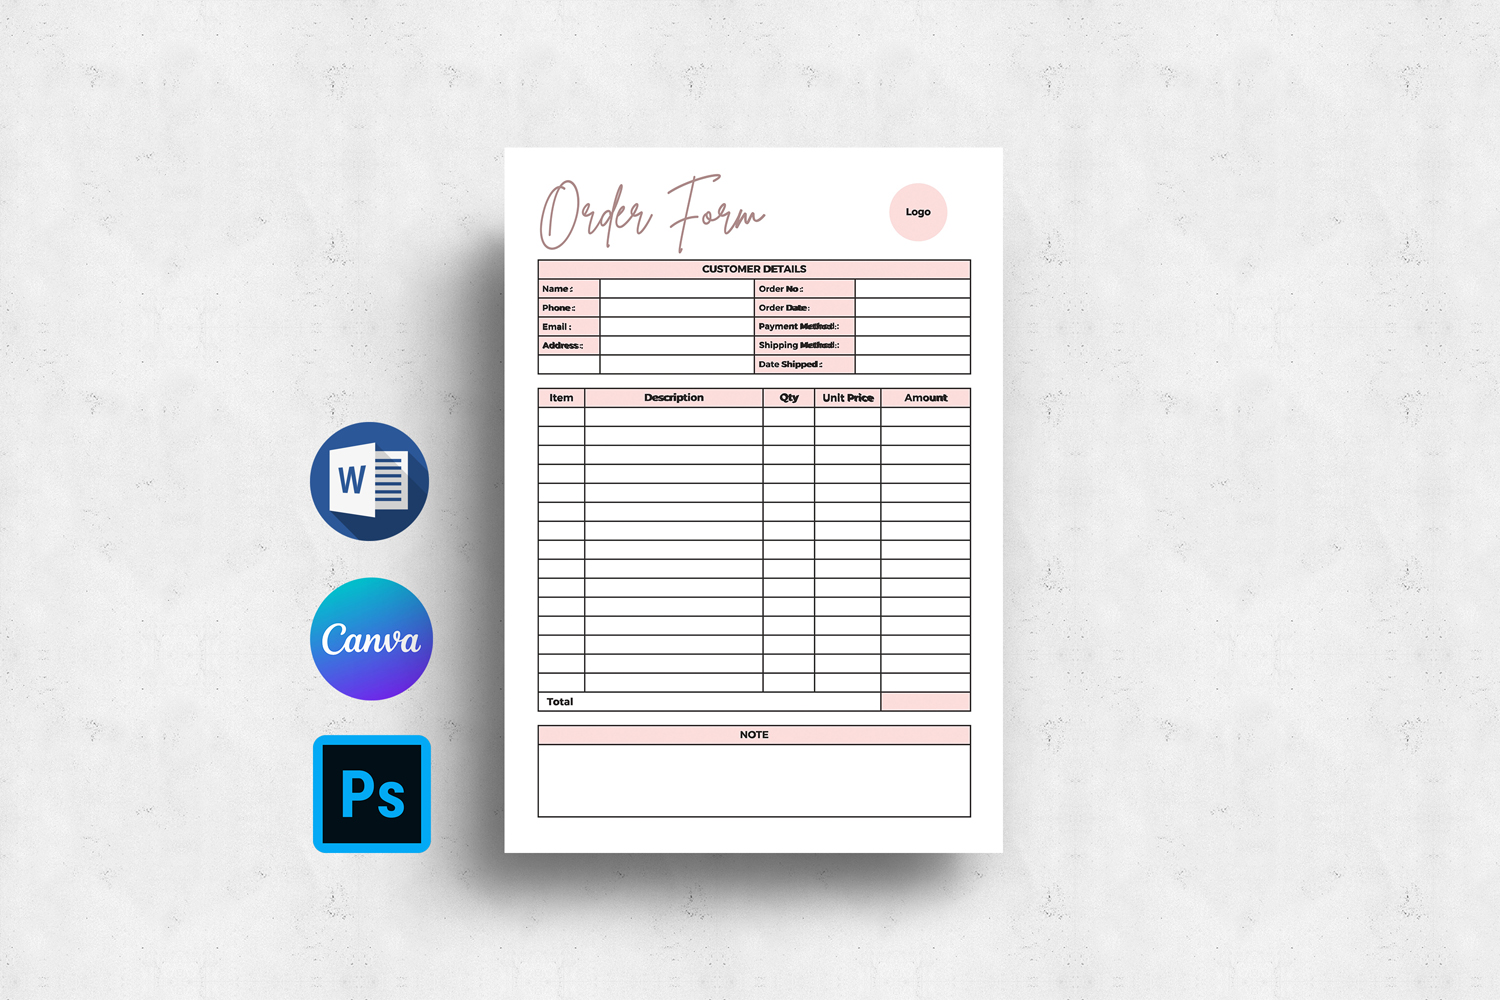 Business Order Form Template